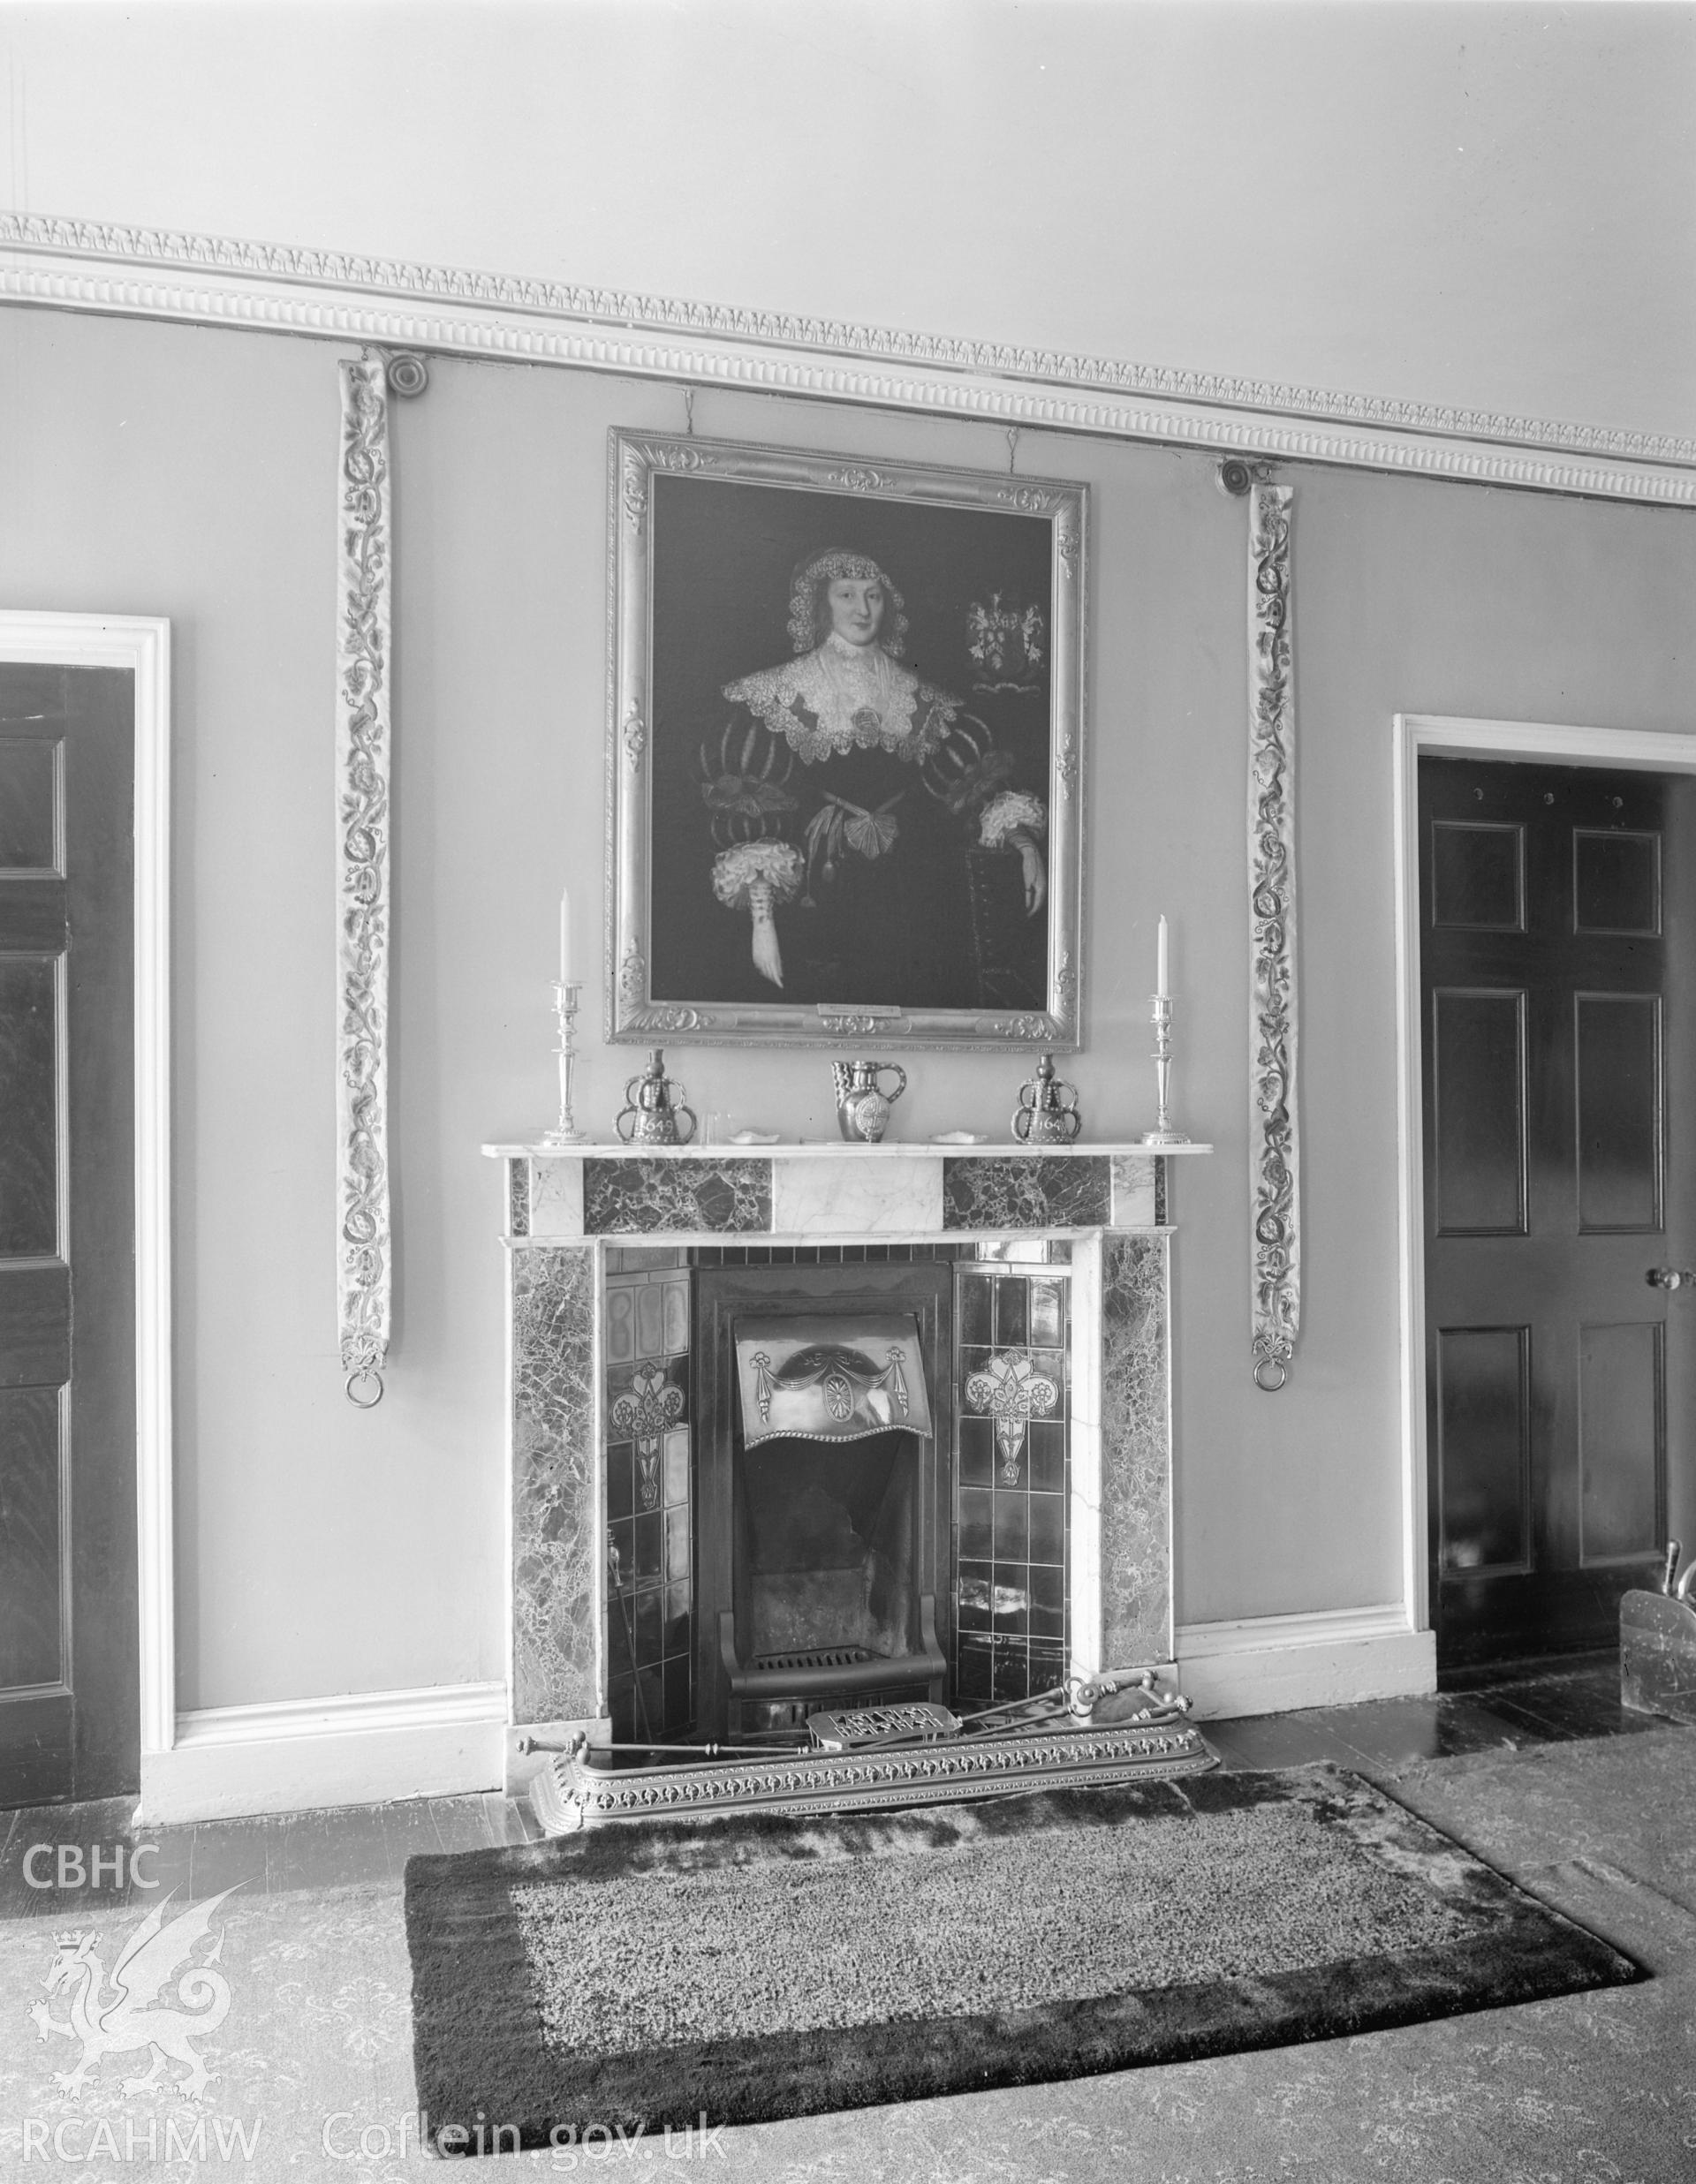 View of fireplace